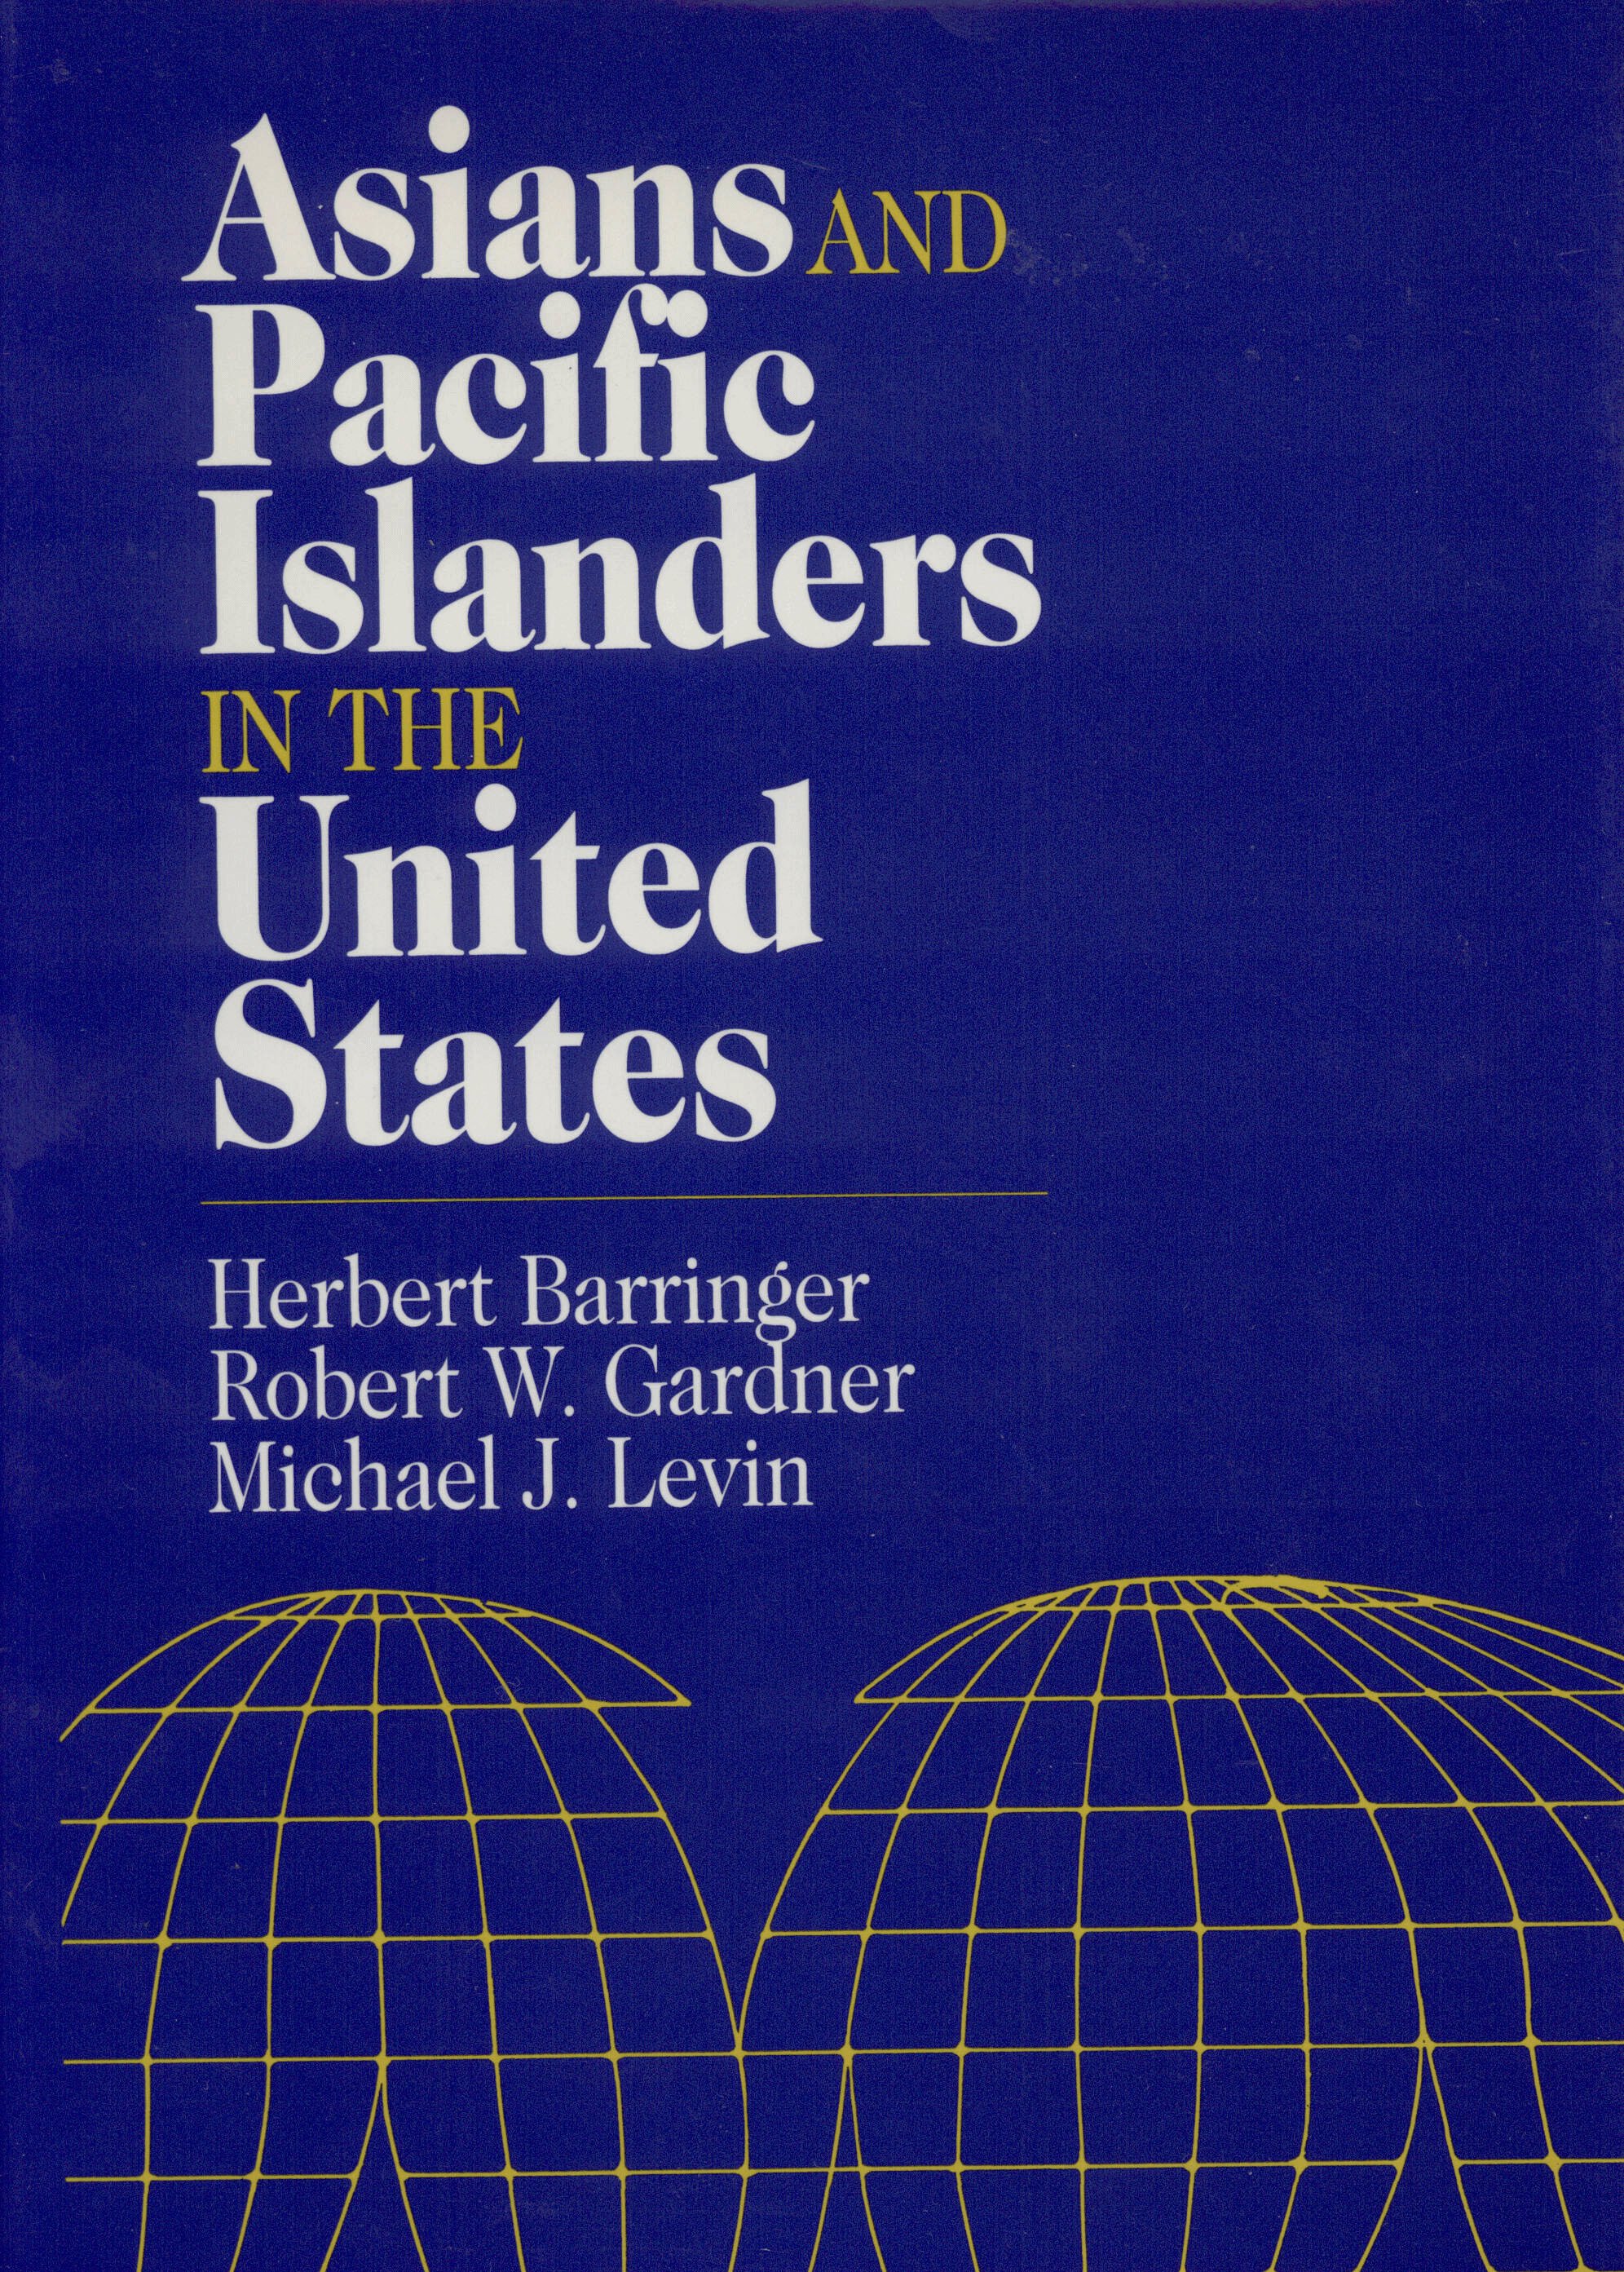 BerringerAsians-and-Pacific-Islanders-in-the-United-States_0.jpeg